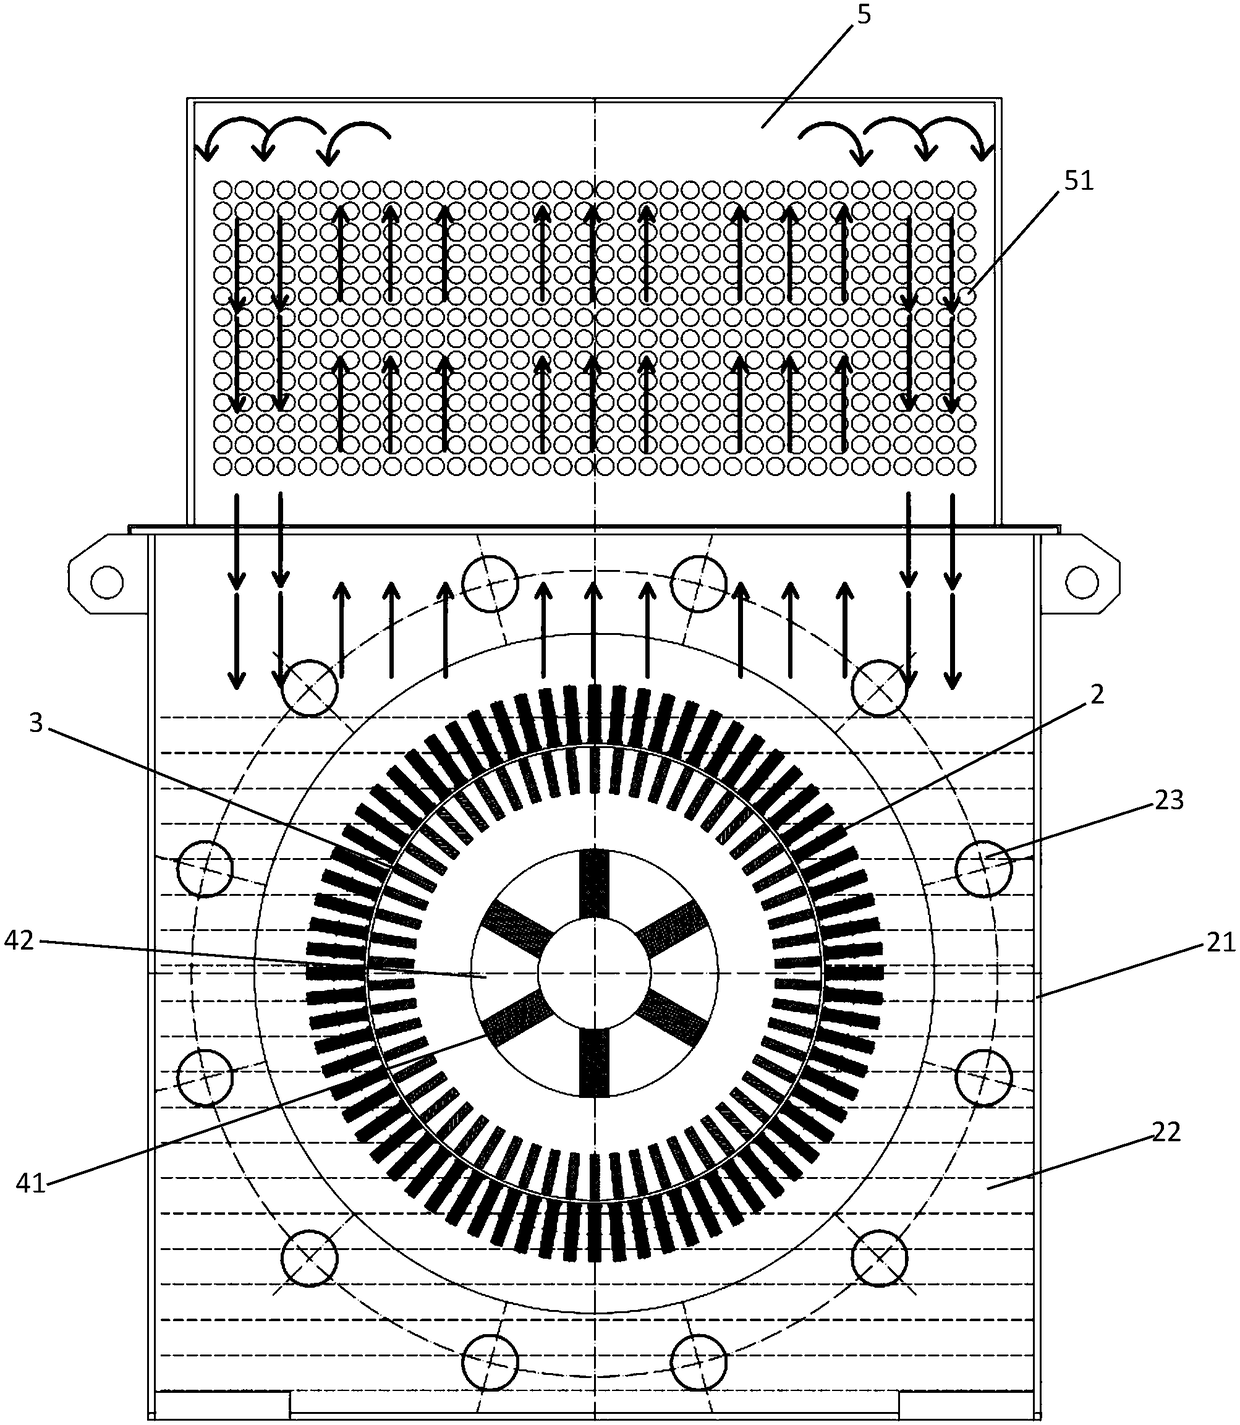 Motor cooling structure based on cooling liquid